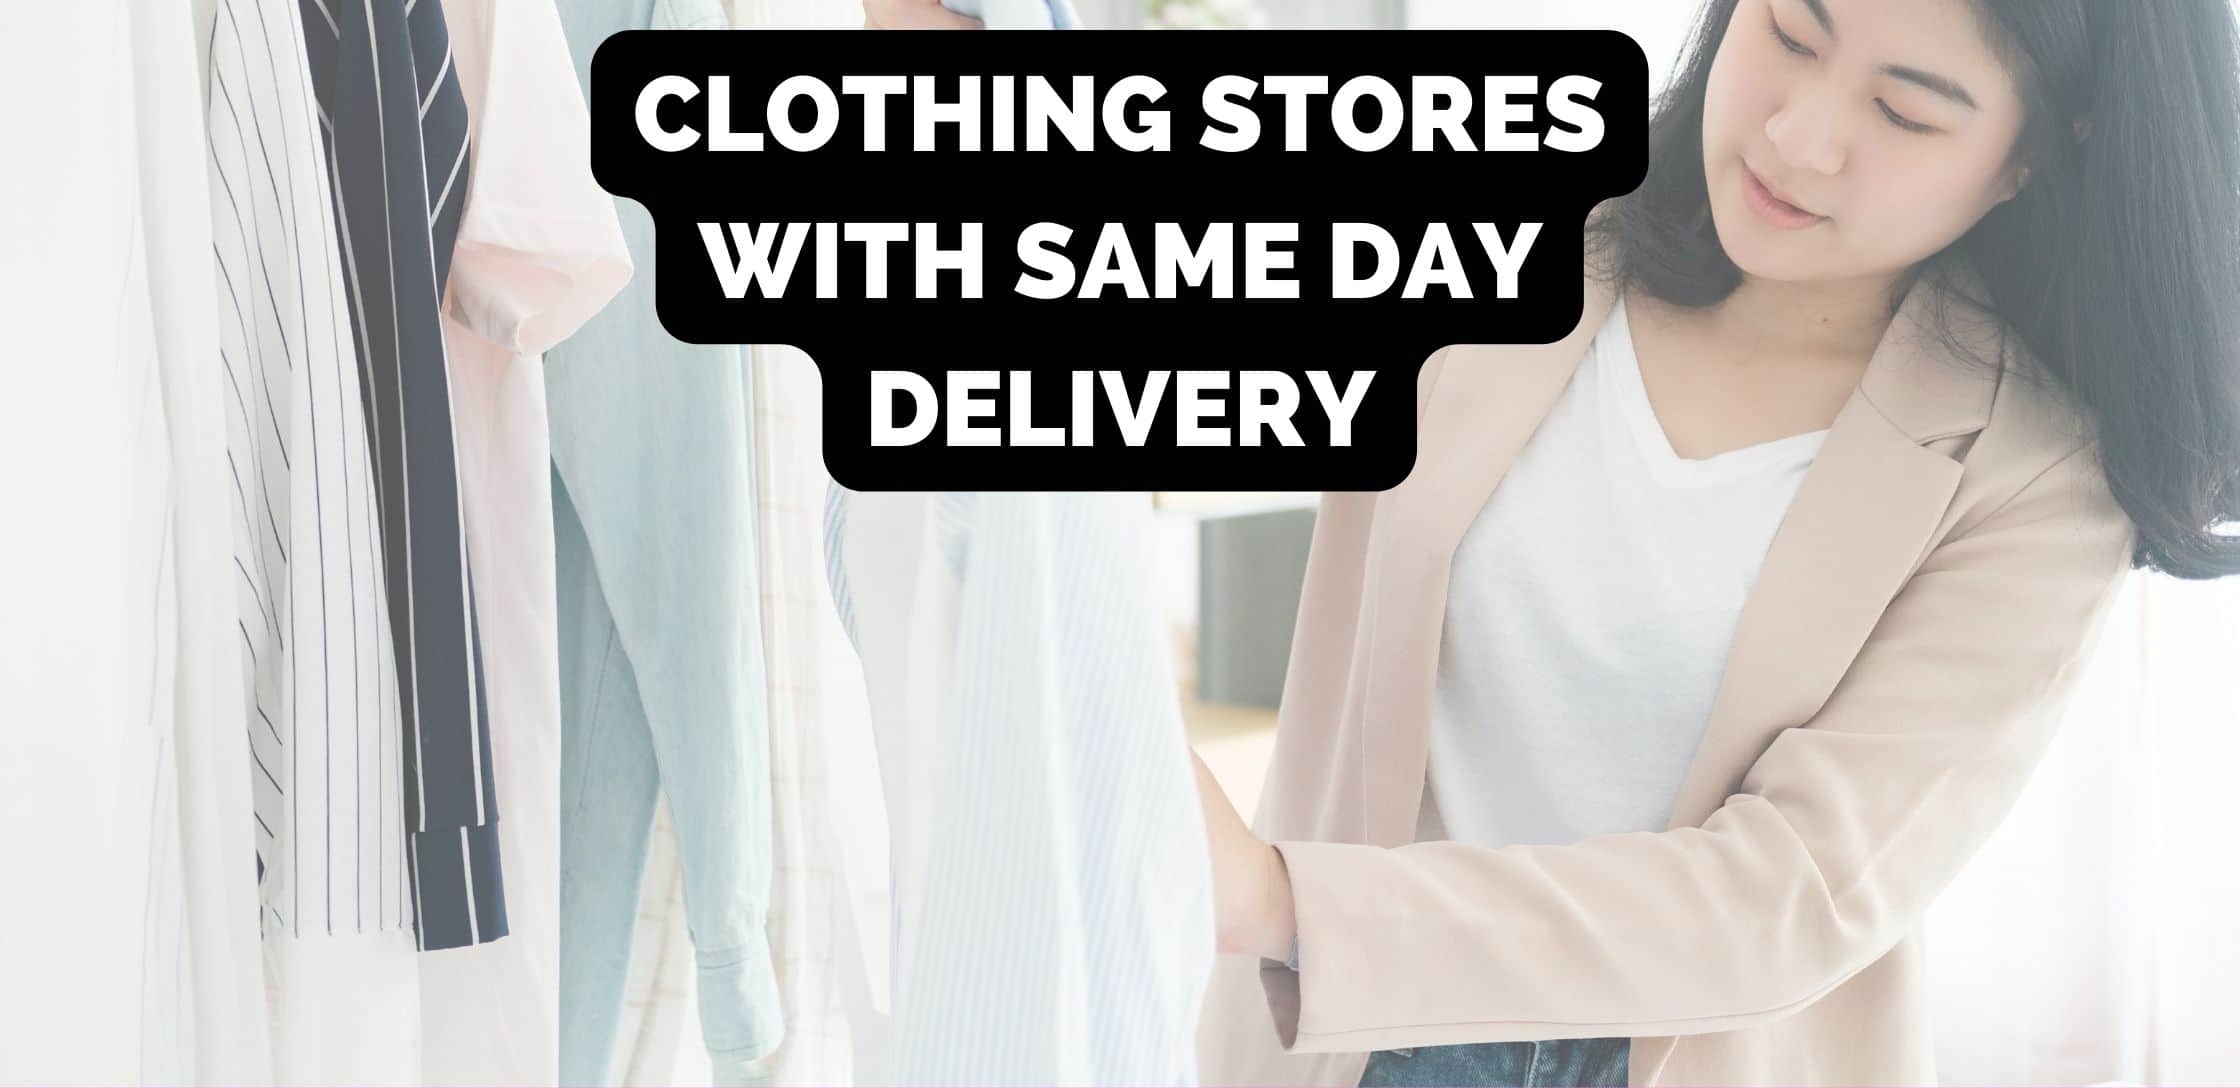 HSMQHJWE Same Day Delivery Items Prime Clothes Ladies Wear Womens